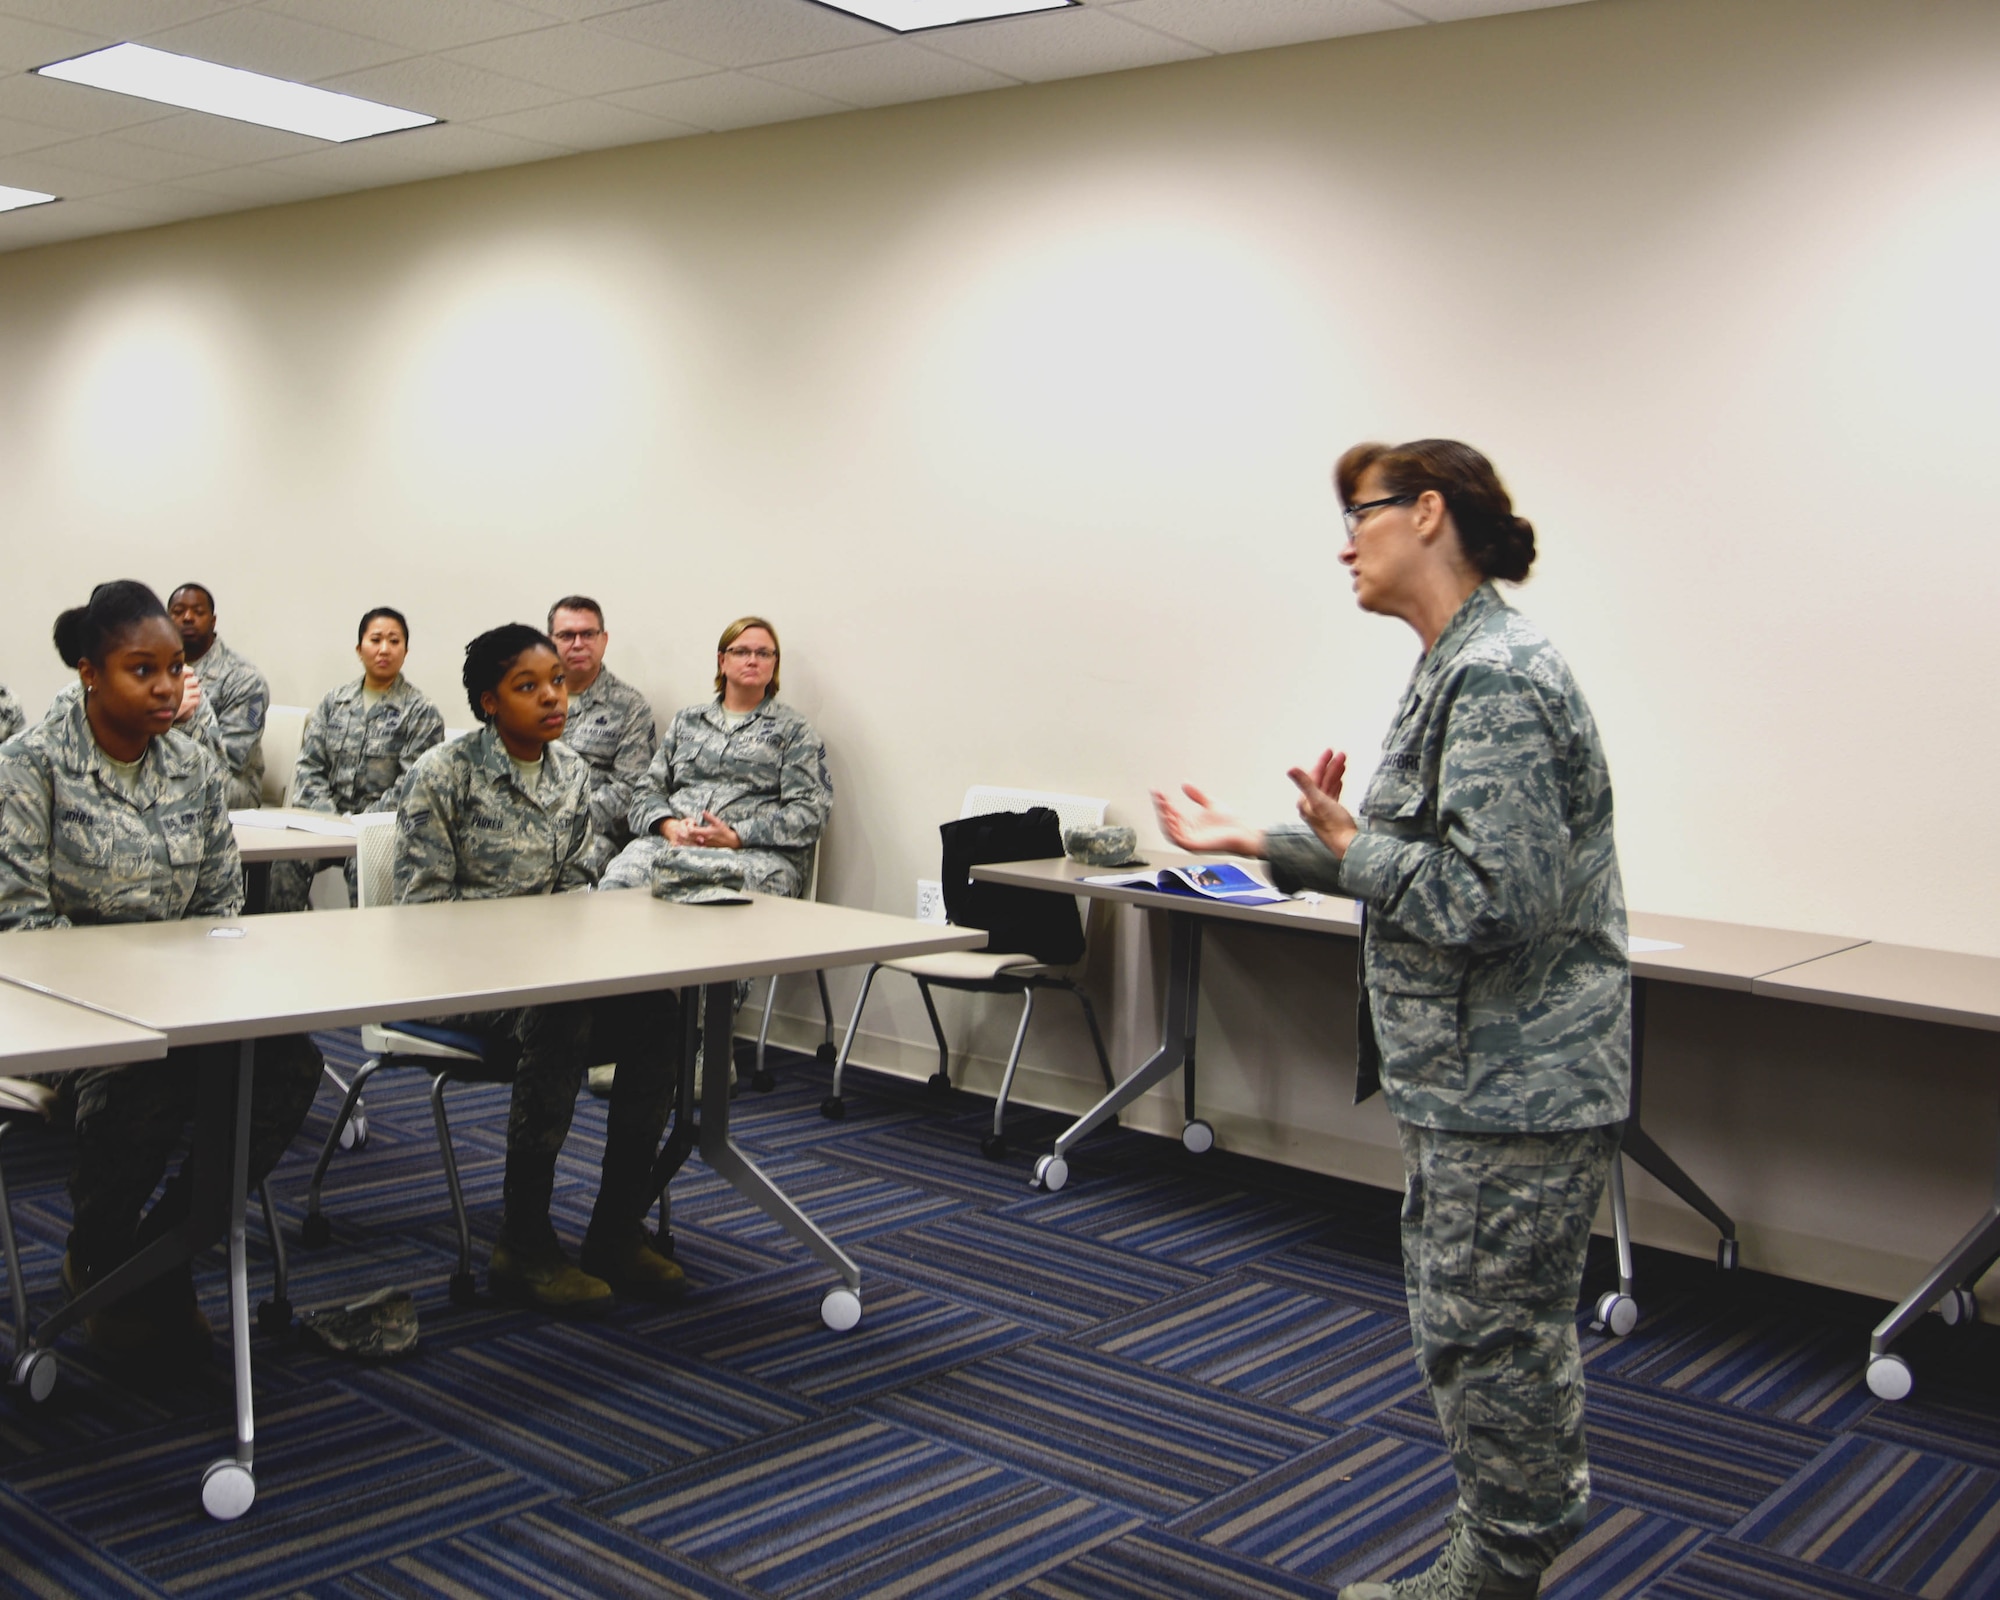 The Air Force Reserve director of manpower, personnel and services spoke on recruiting and retaining quality Airmen during a Force Support Squadron all call Dec. 1, 2018.